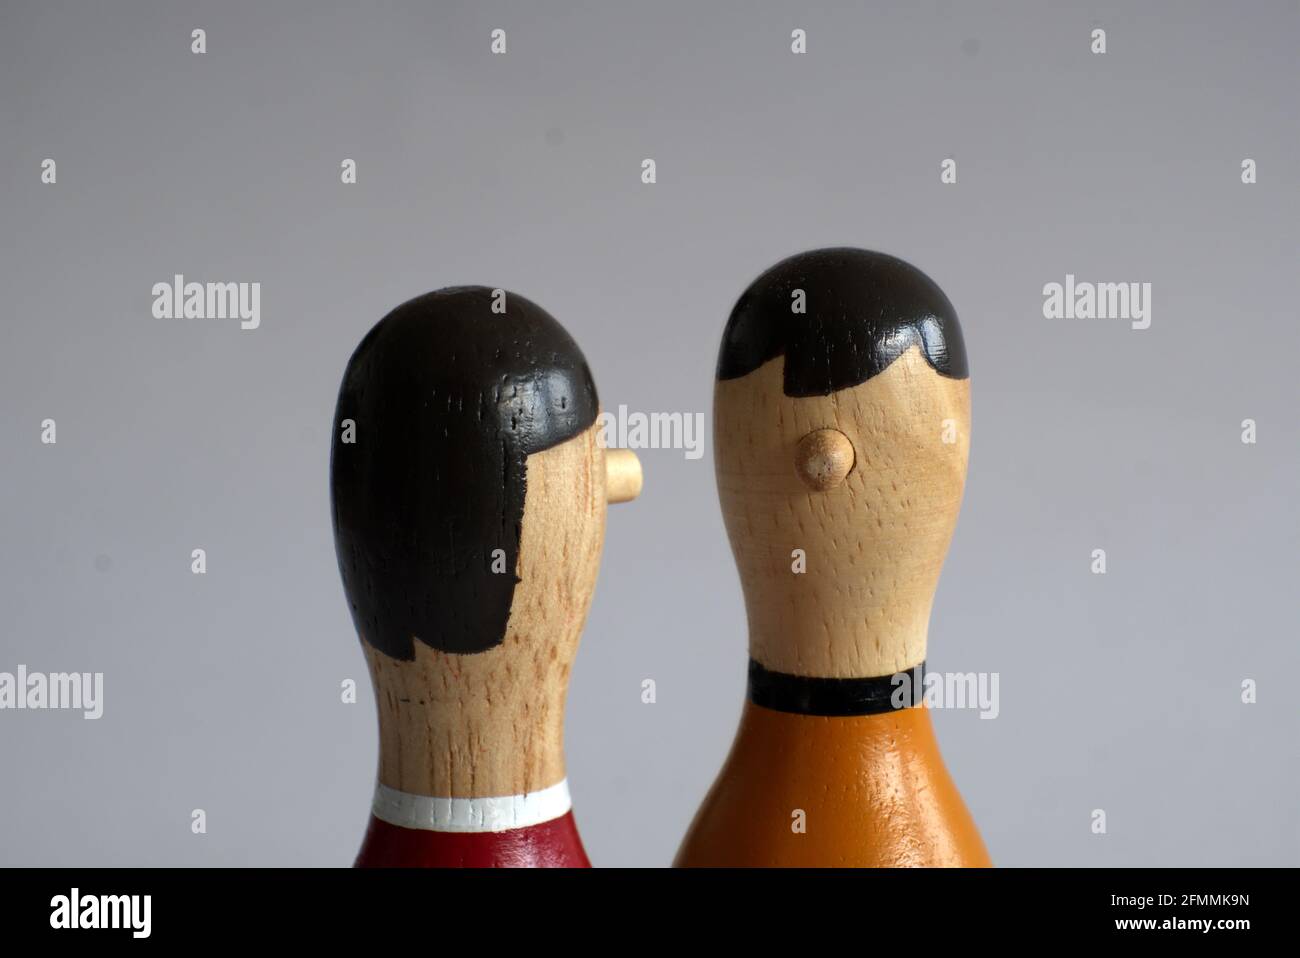 narrow countershot of a dialogue between two wooden puppets Stock Photo